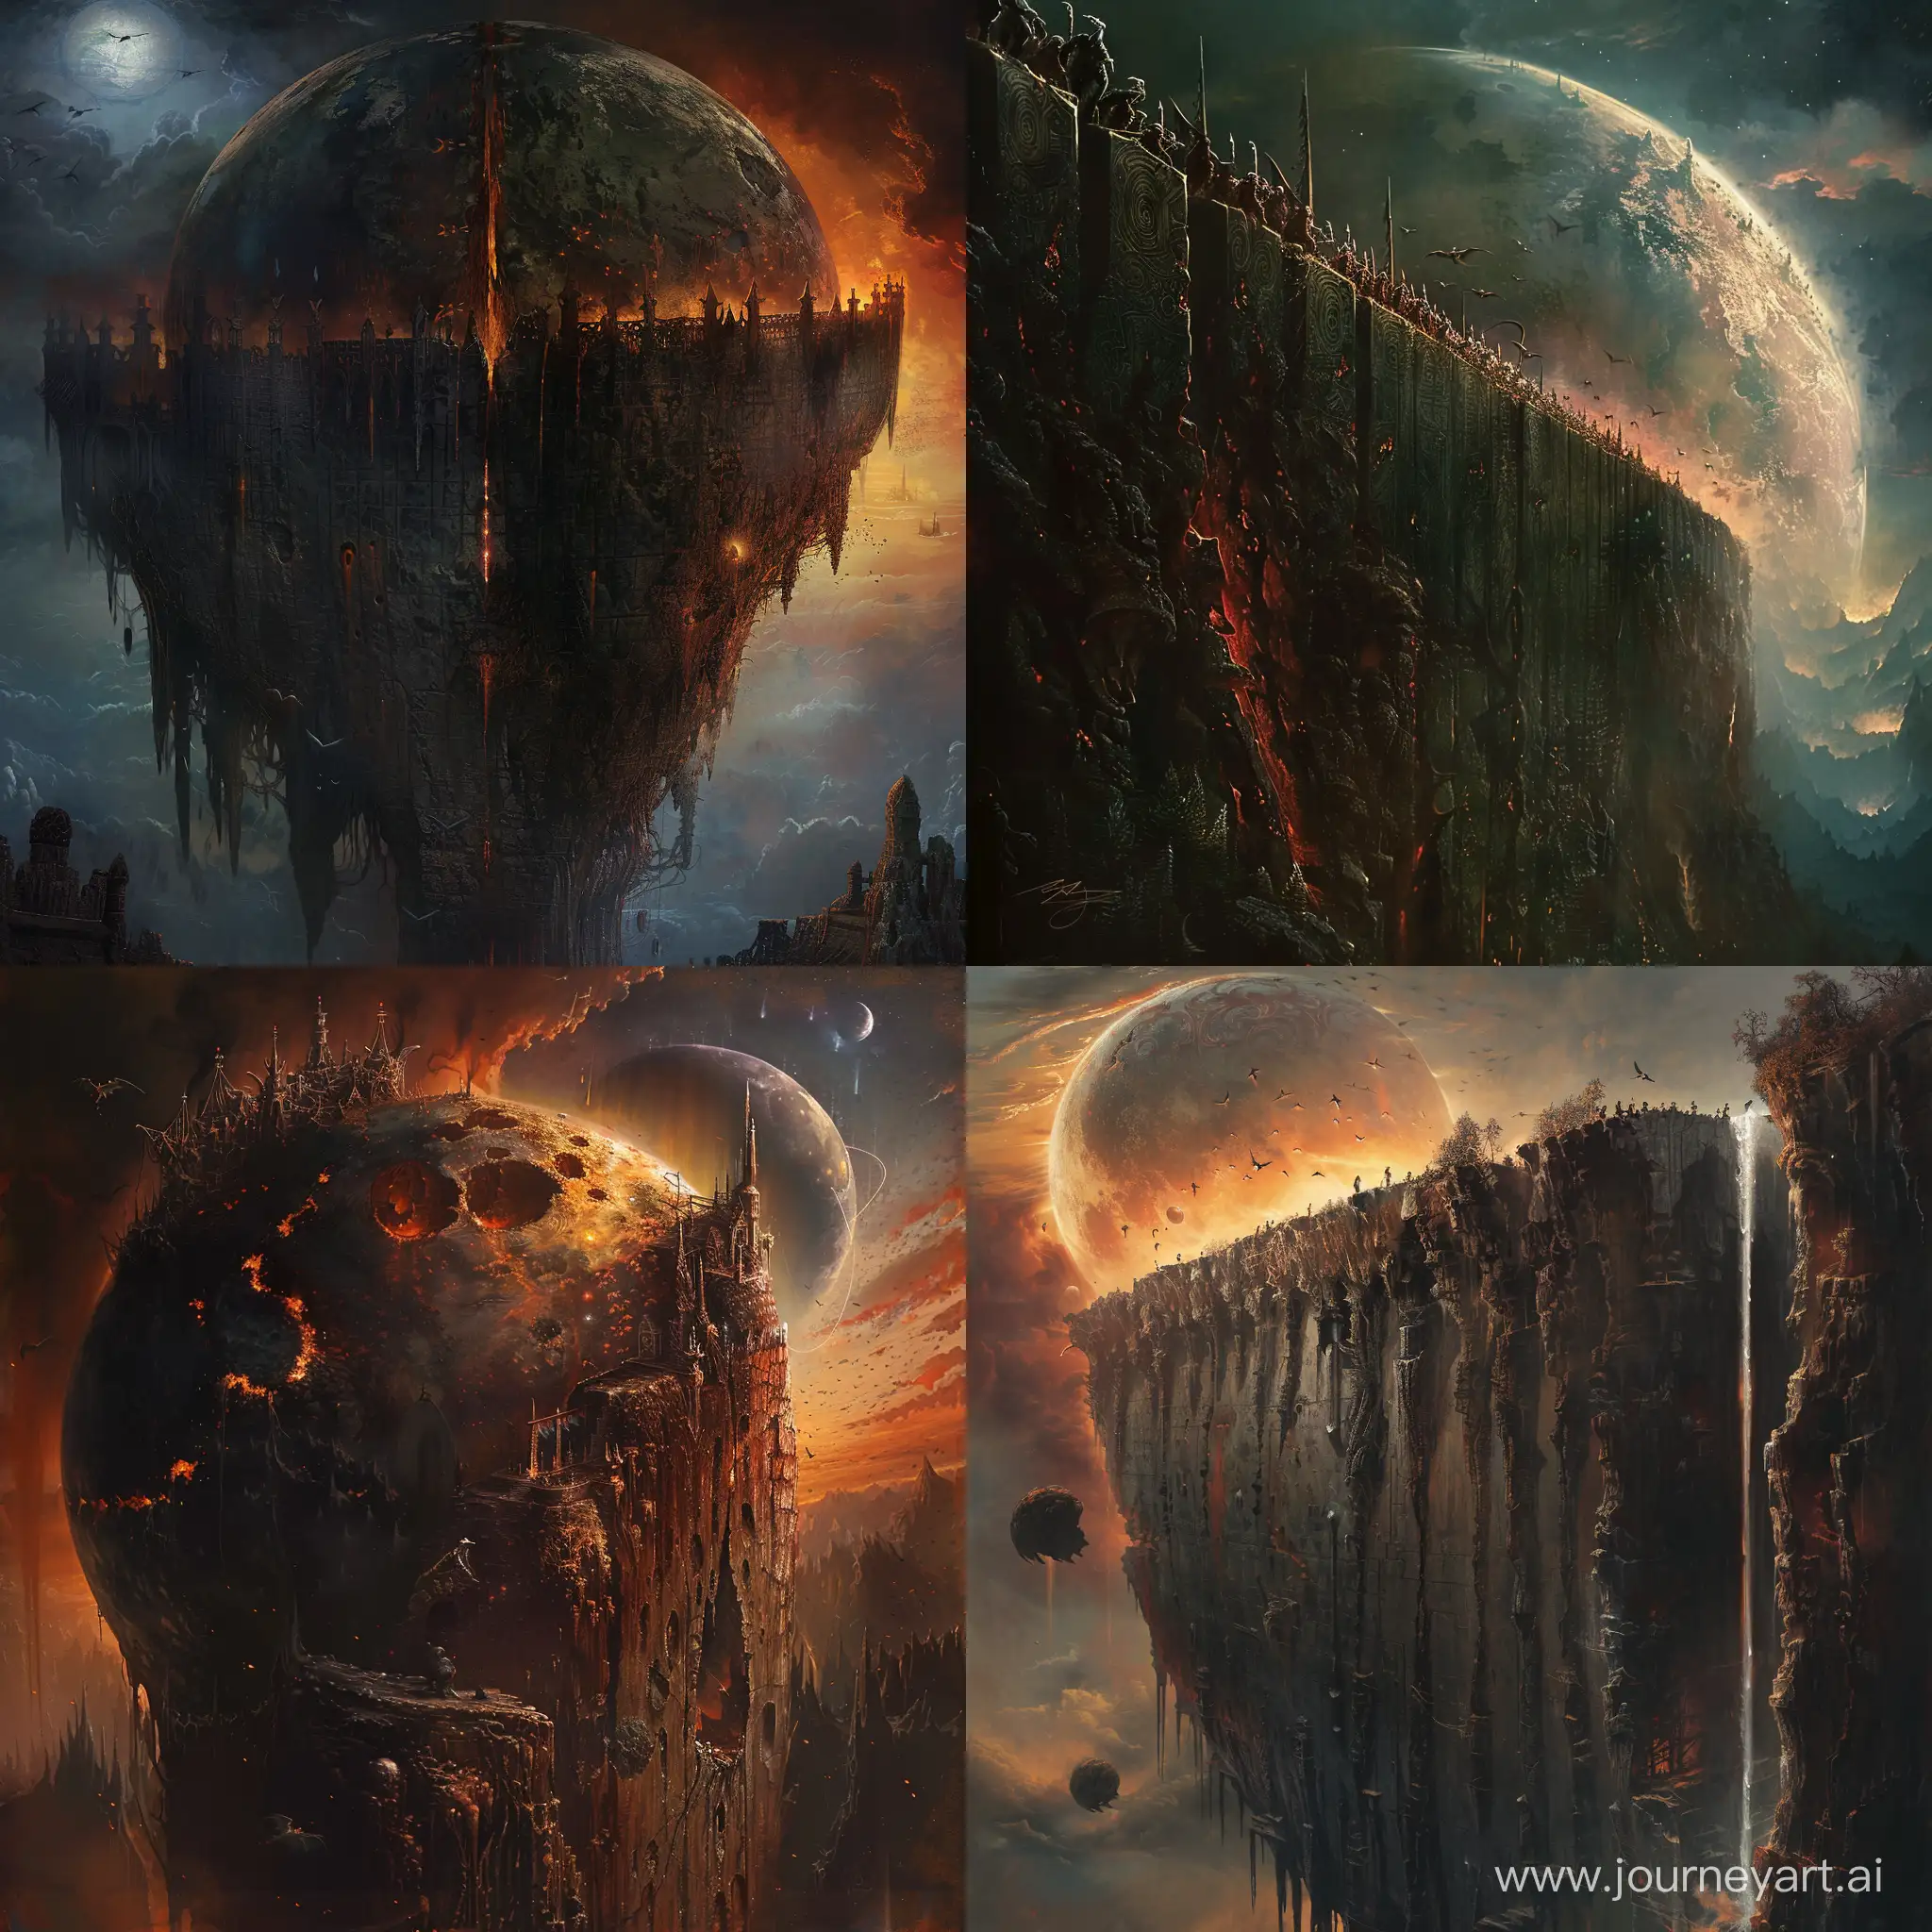 Fantasy-Planet-Split-by-Enormous-Wall-Demons-and-Elves-Realms